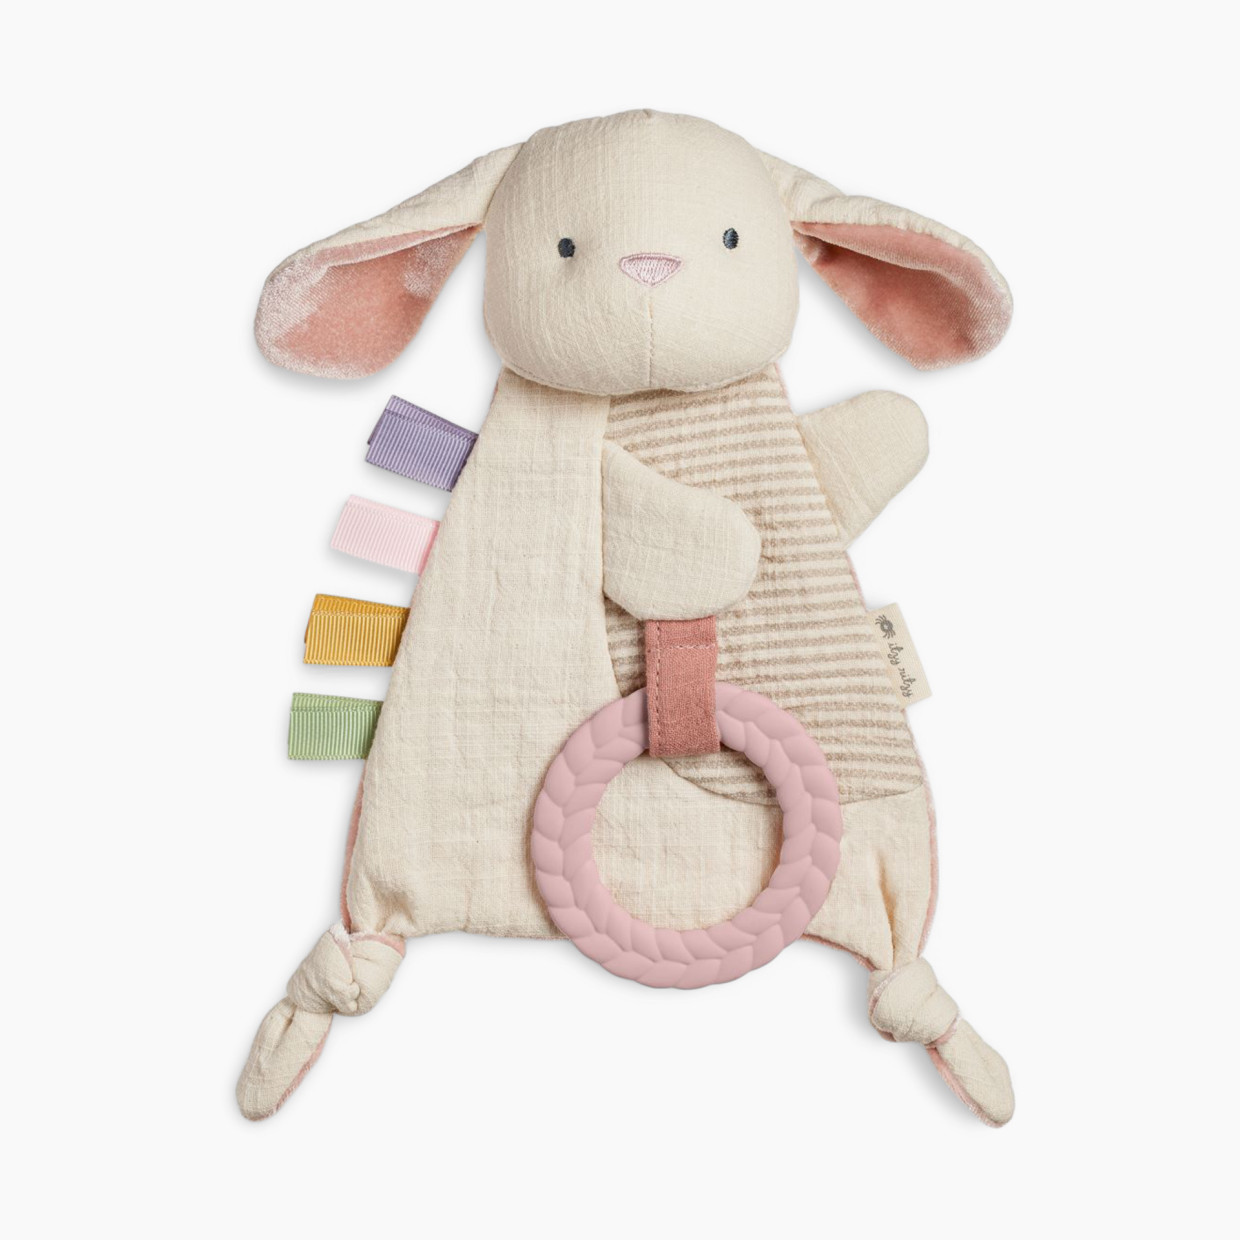 Itzy Ritzy Bitzy Crinkle Sensory Crinkle Toy with Teether - Bunny.